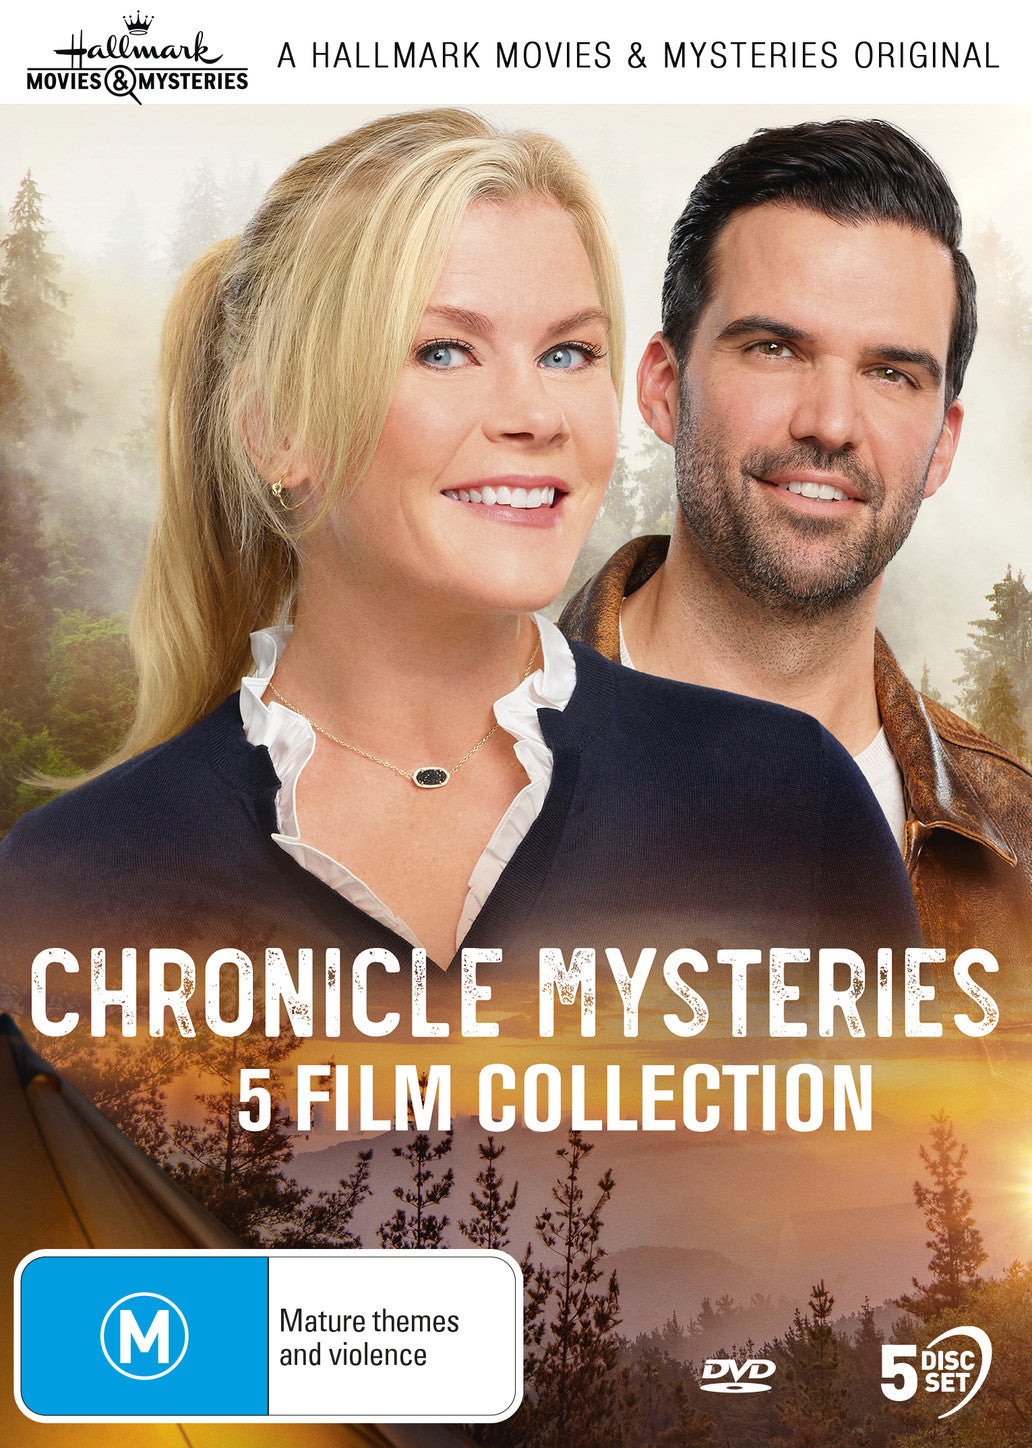 CHRONICLE MYSTERIES: 5 FILM COLLECTION